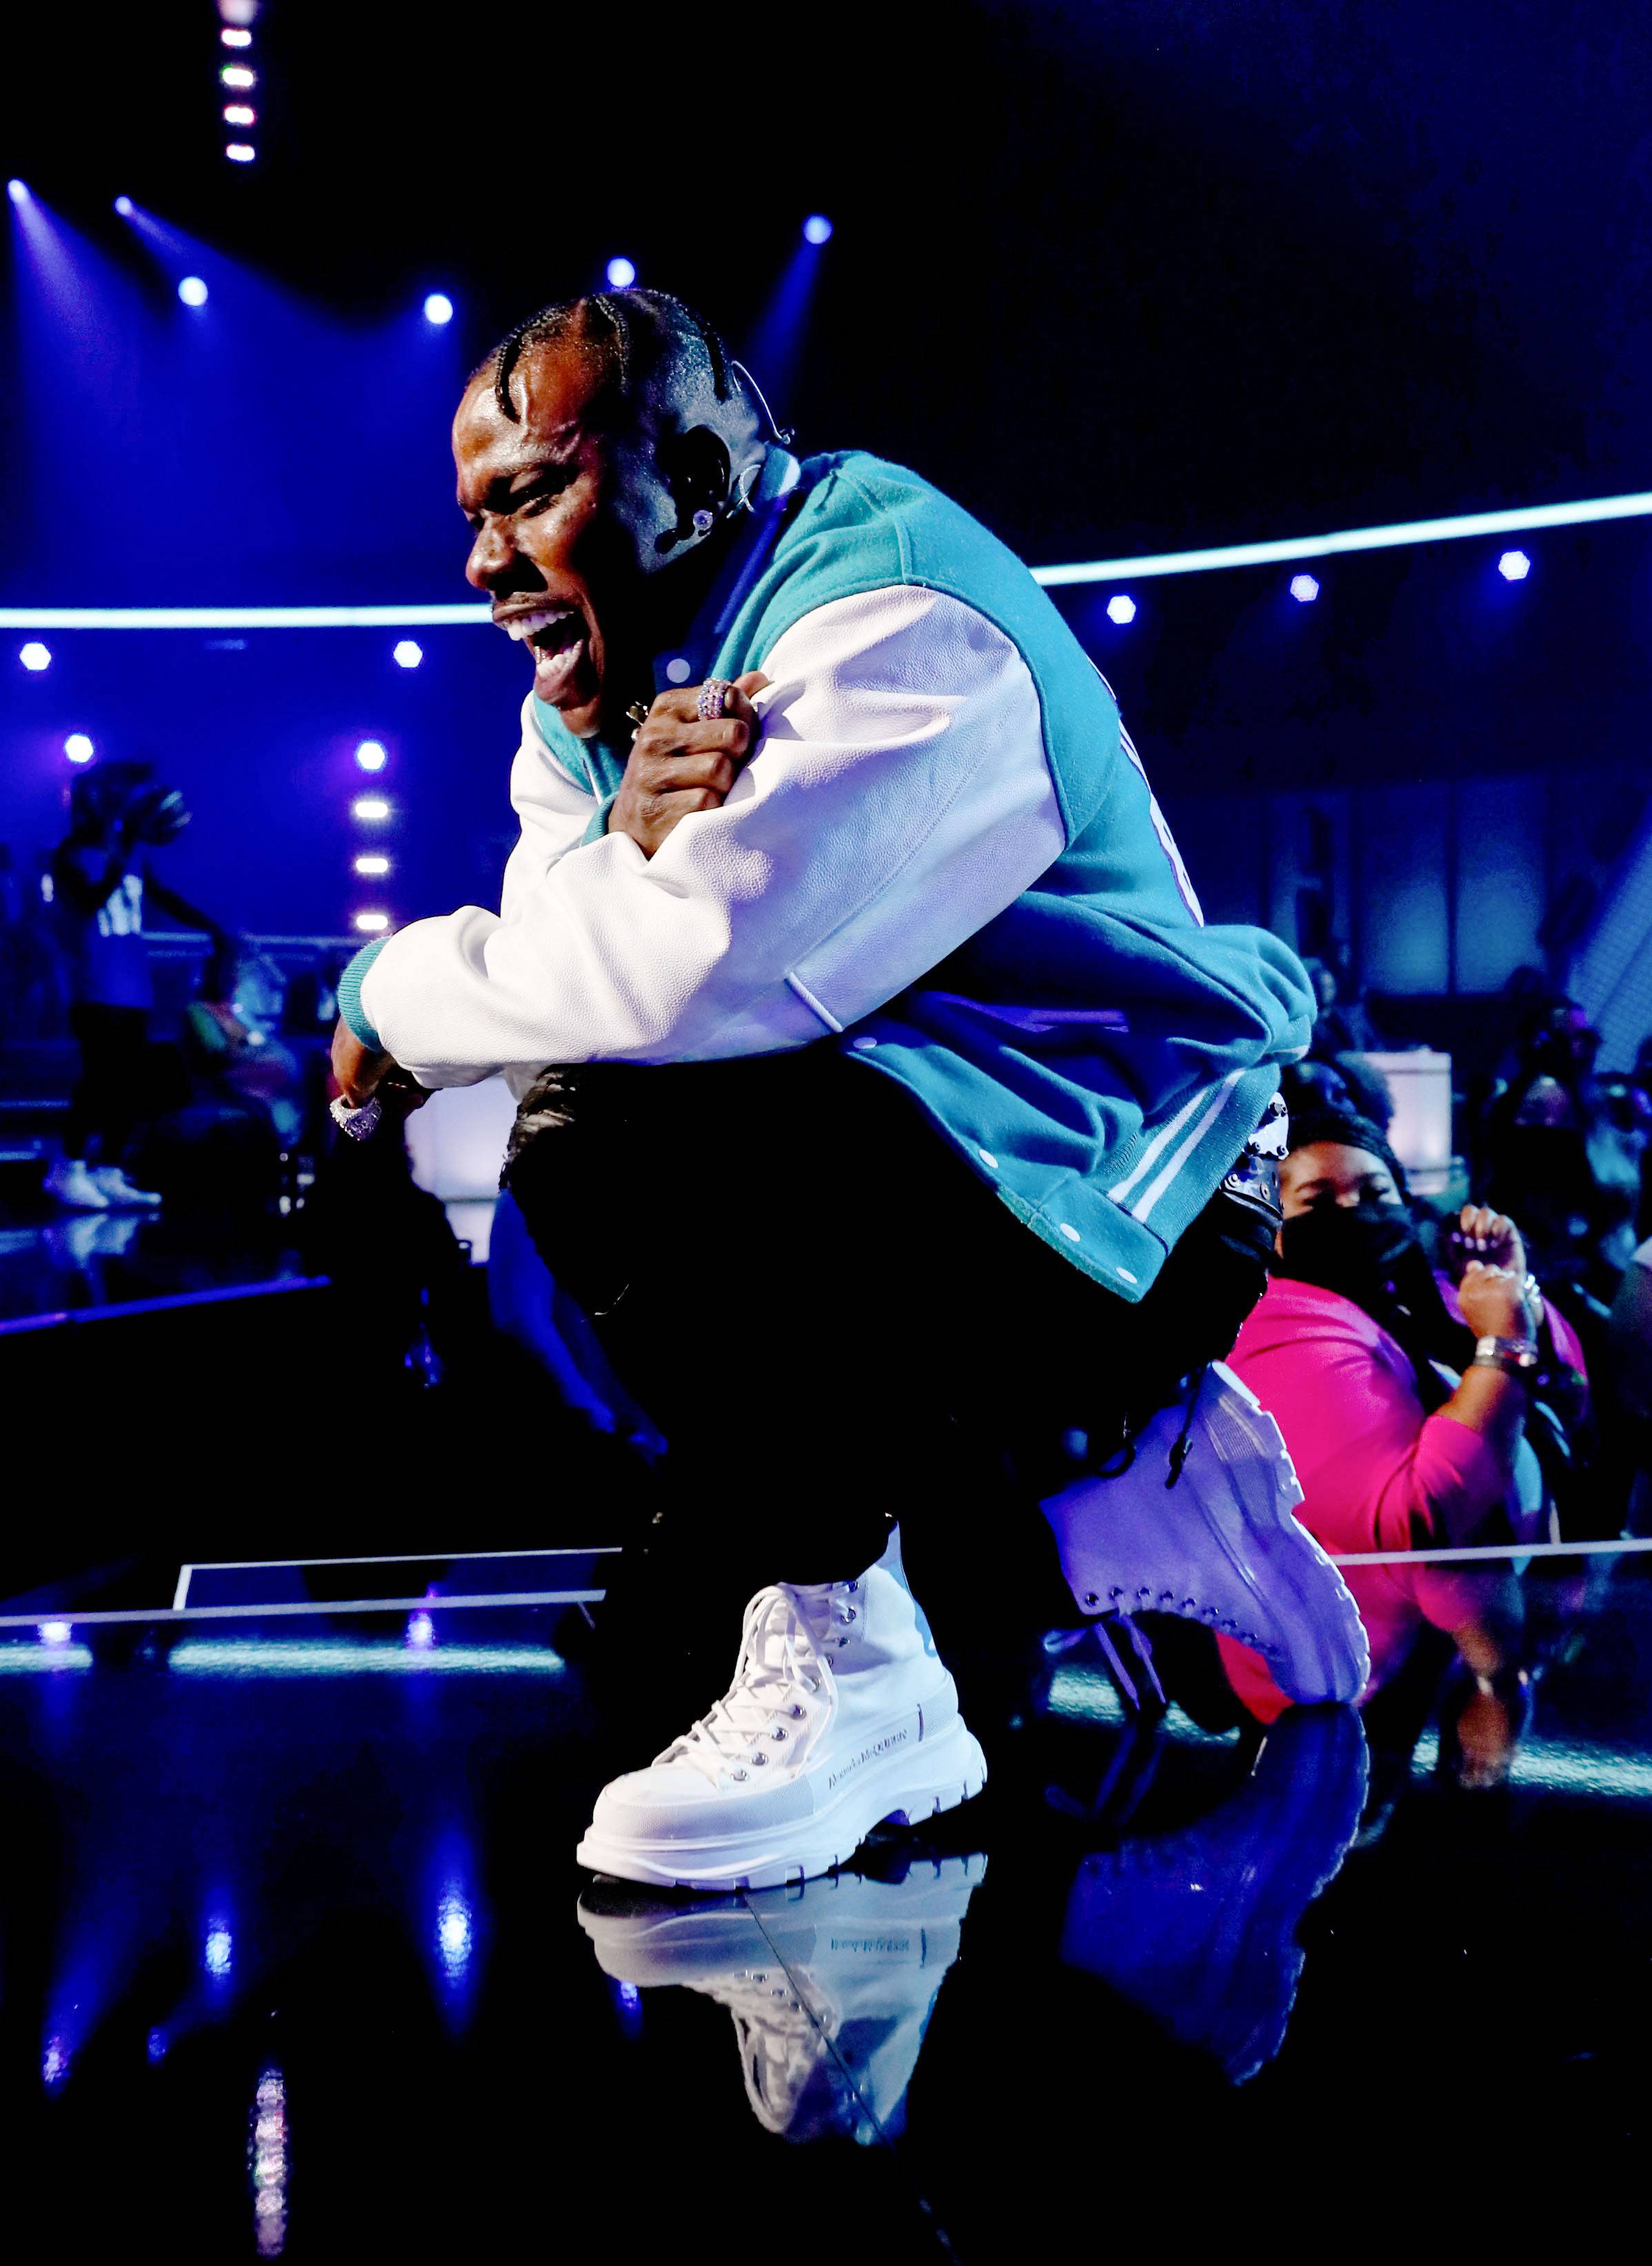 LOS ANGELES, CALIFORNIA - JUNE 27: DaBaby performs onstage at the BET Awards 2021 at Microsoft Theater on June 27, 2021 in Los Angeles, California. (Photo by Bennett Raglin/Getty Images for BET)